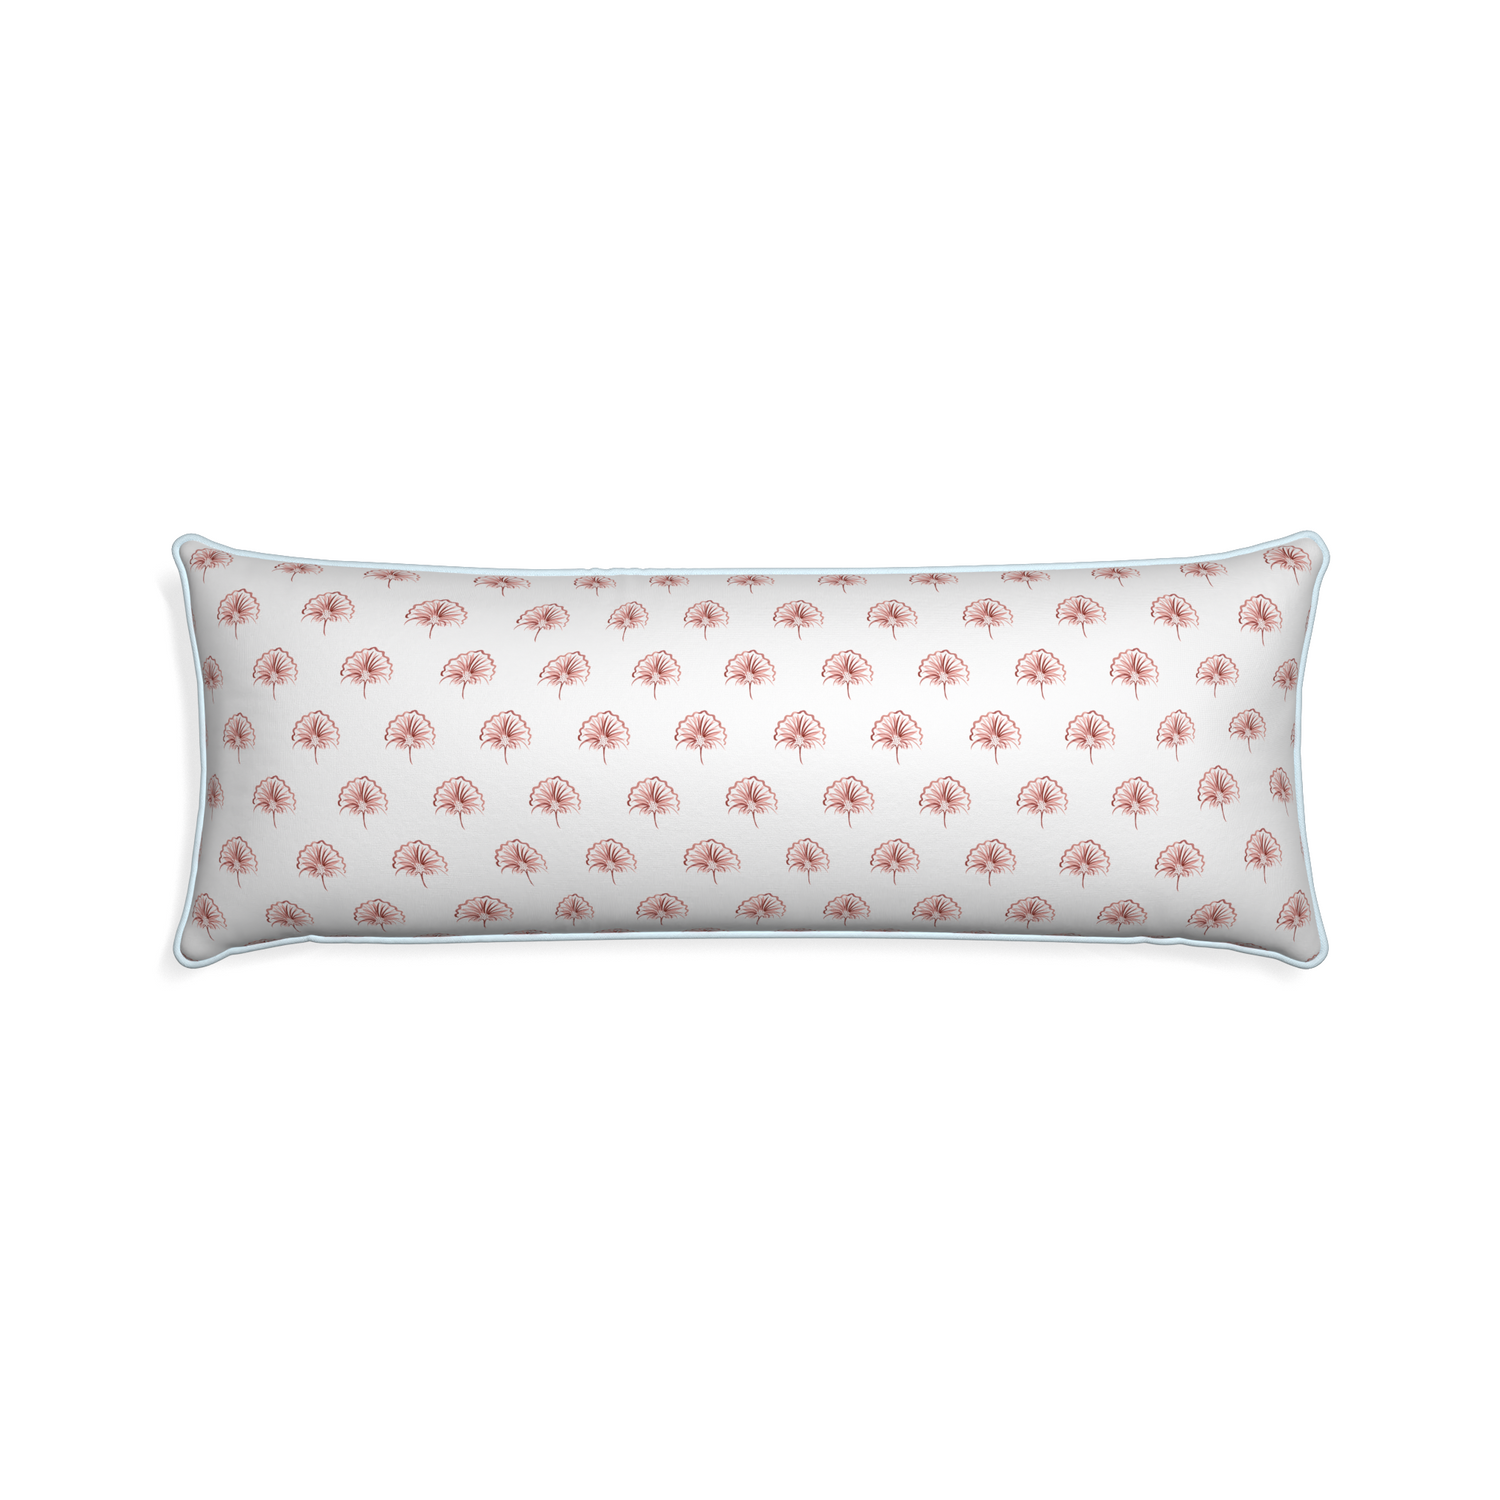 Xl-lumbar penelope rose custom floral pinkpillow with powder piping on white background